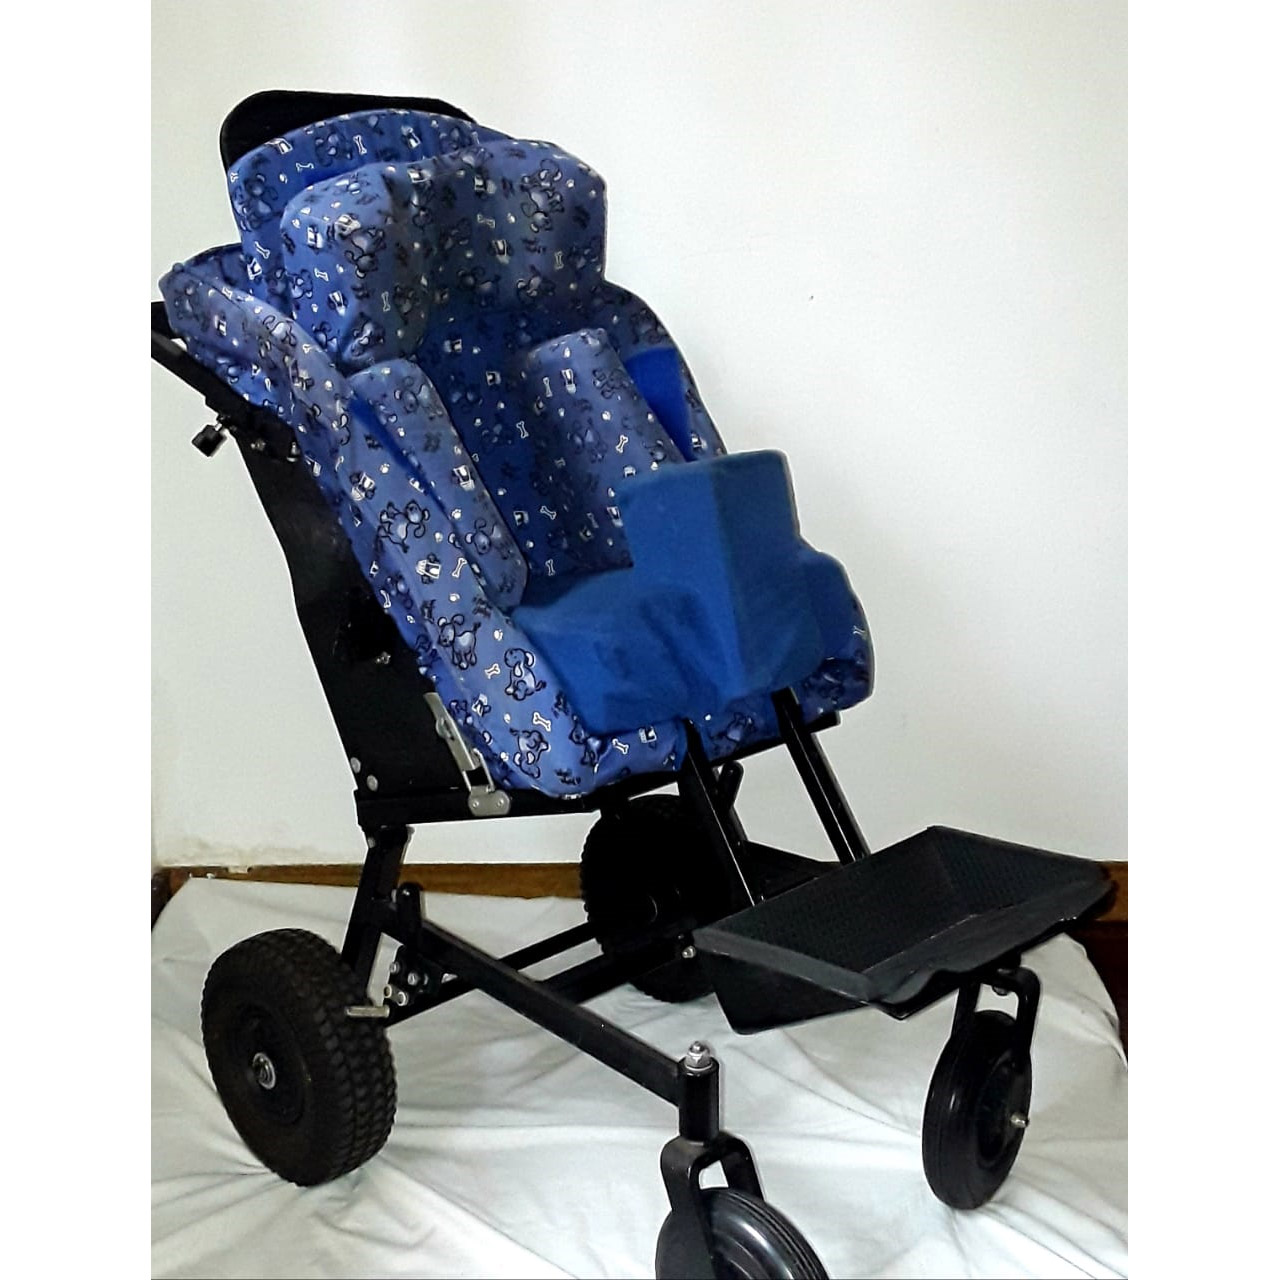 disability buggy second hand